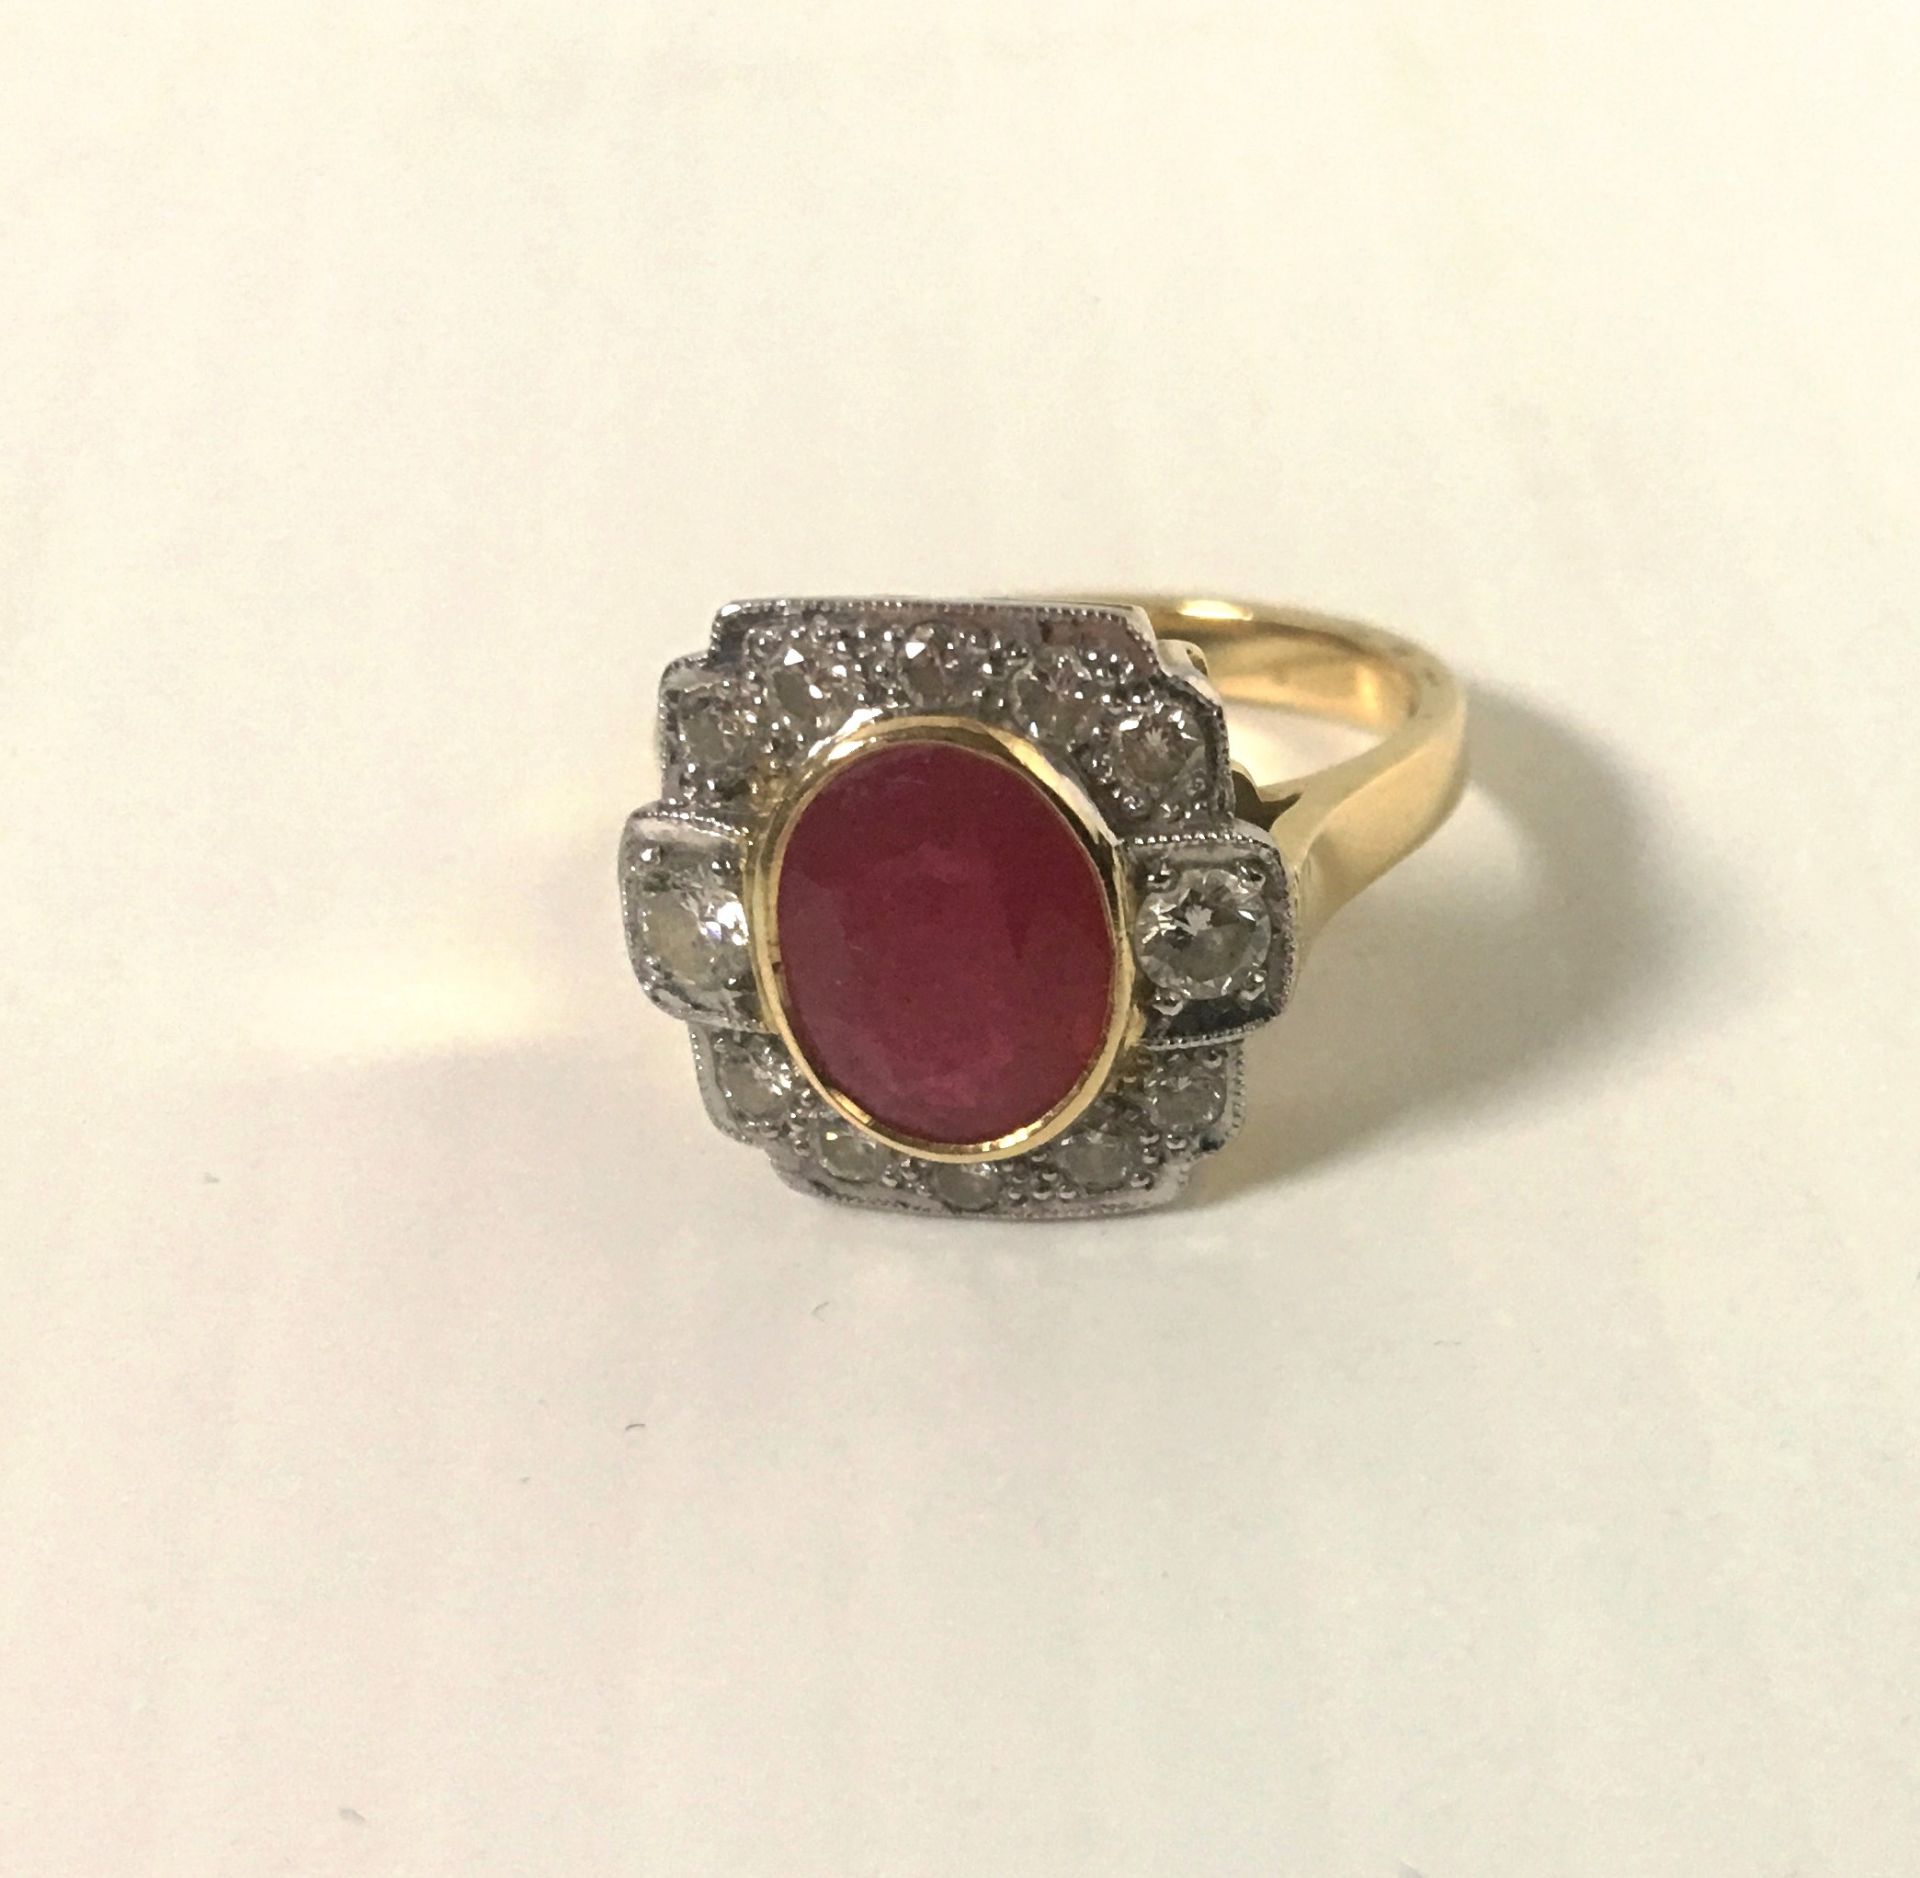 An Art Deco style ruby and diamond ring complete with valuation certificate which details the ring - Image 4 of 8